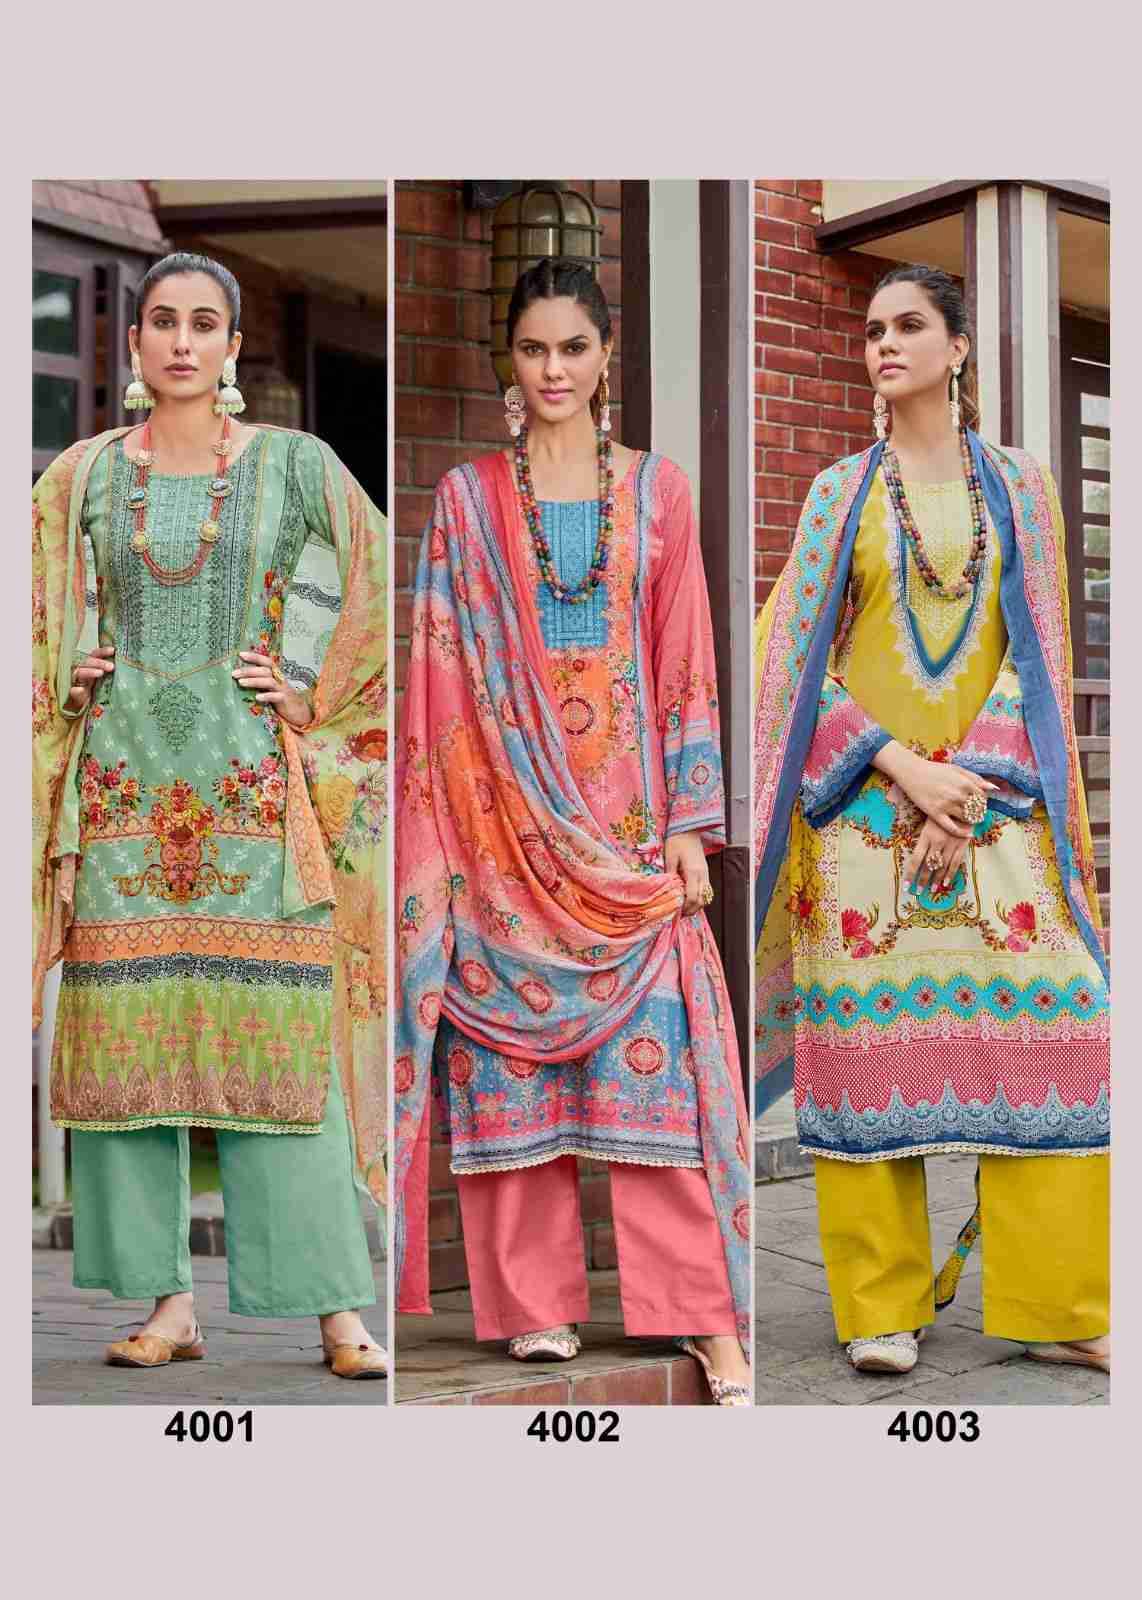 Aza Vol-4 By Hermitage 4001 To 4006 Series Beautiful Festival Suits Stylish Fancy Colorful Casual Wear & Ethnic Wear Pure Viscose Cotton Print Dresses At Wholesale Price